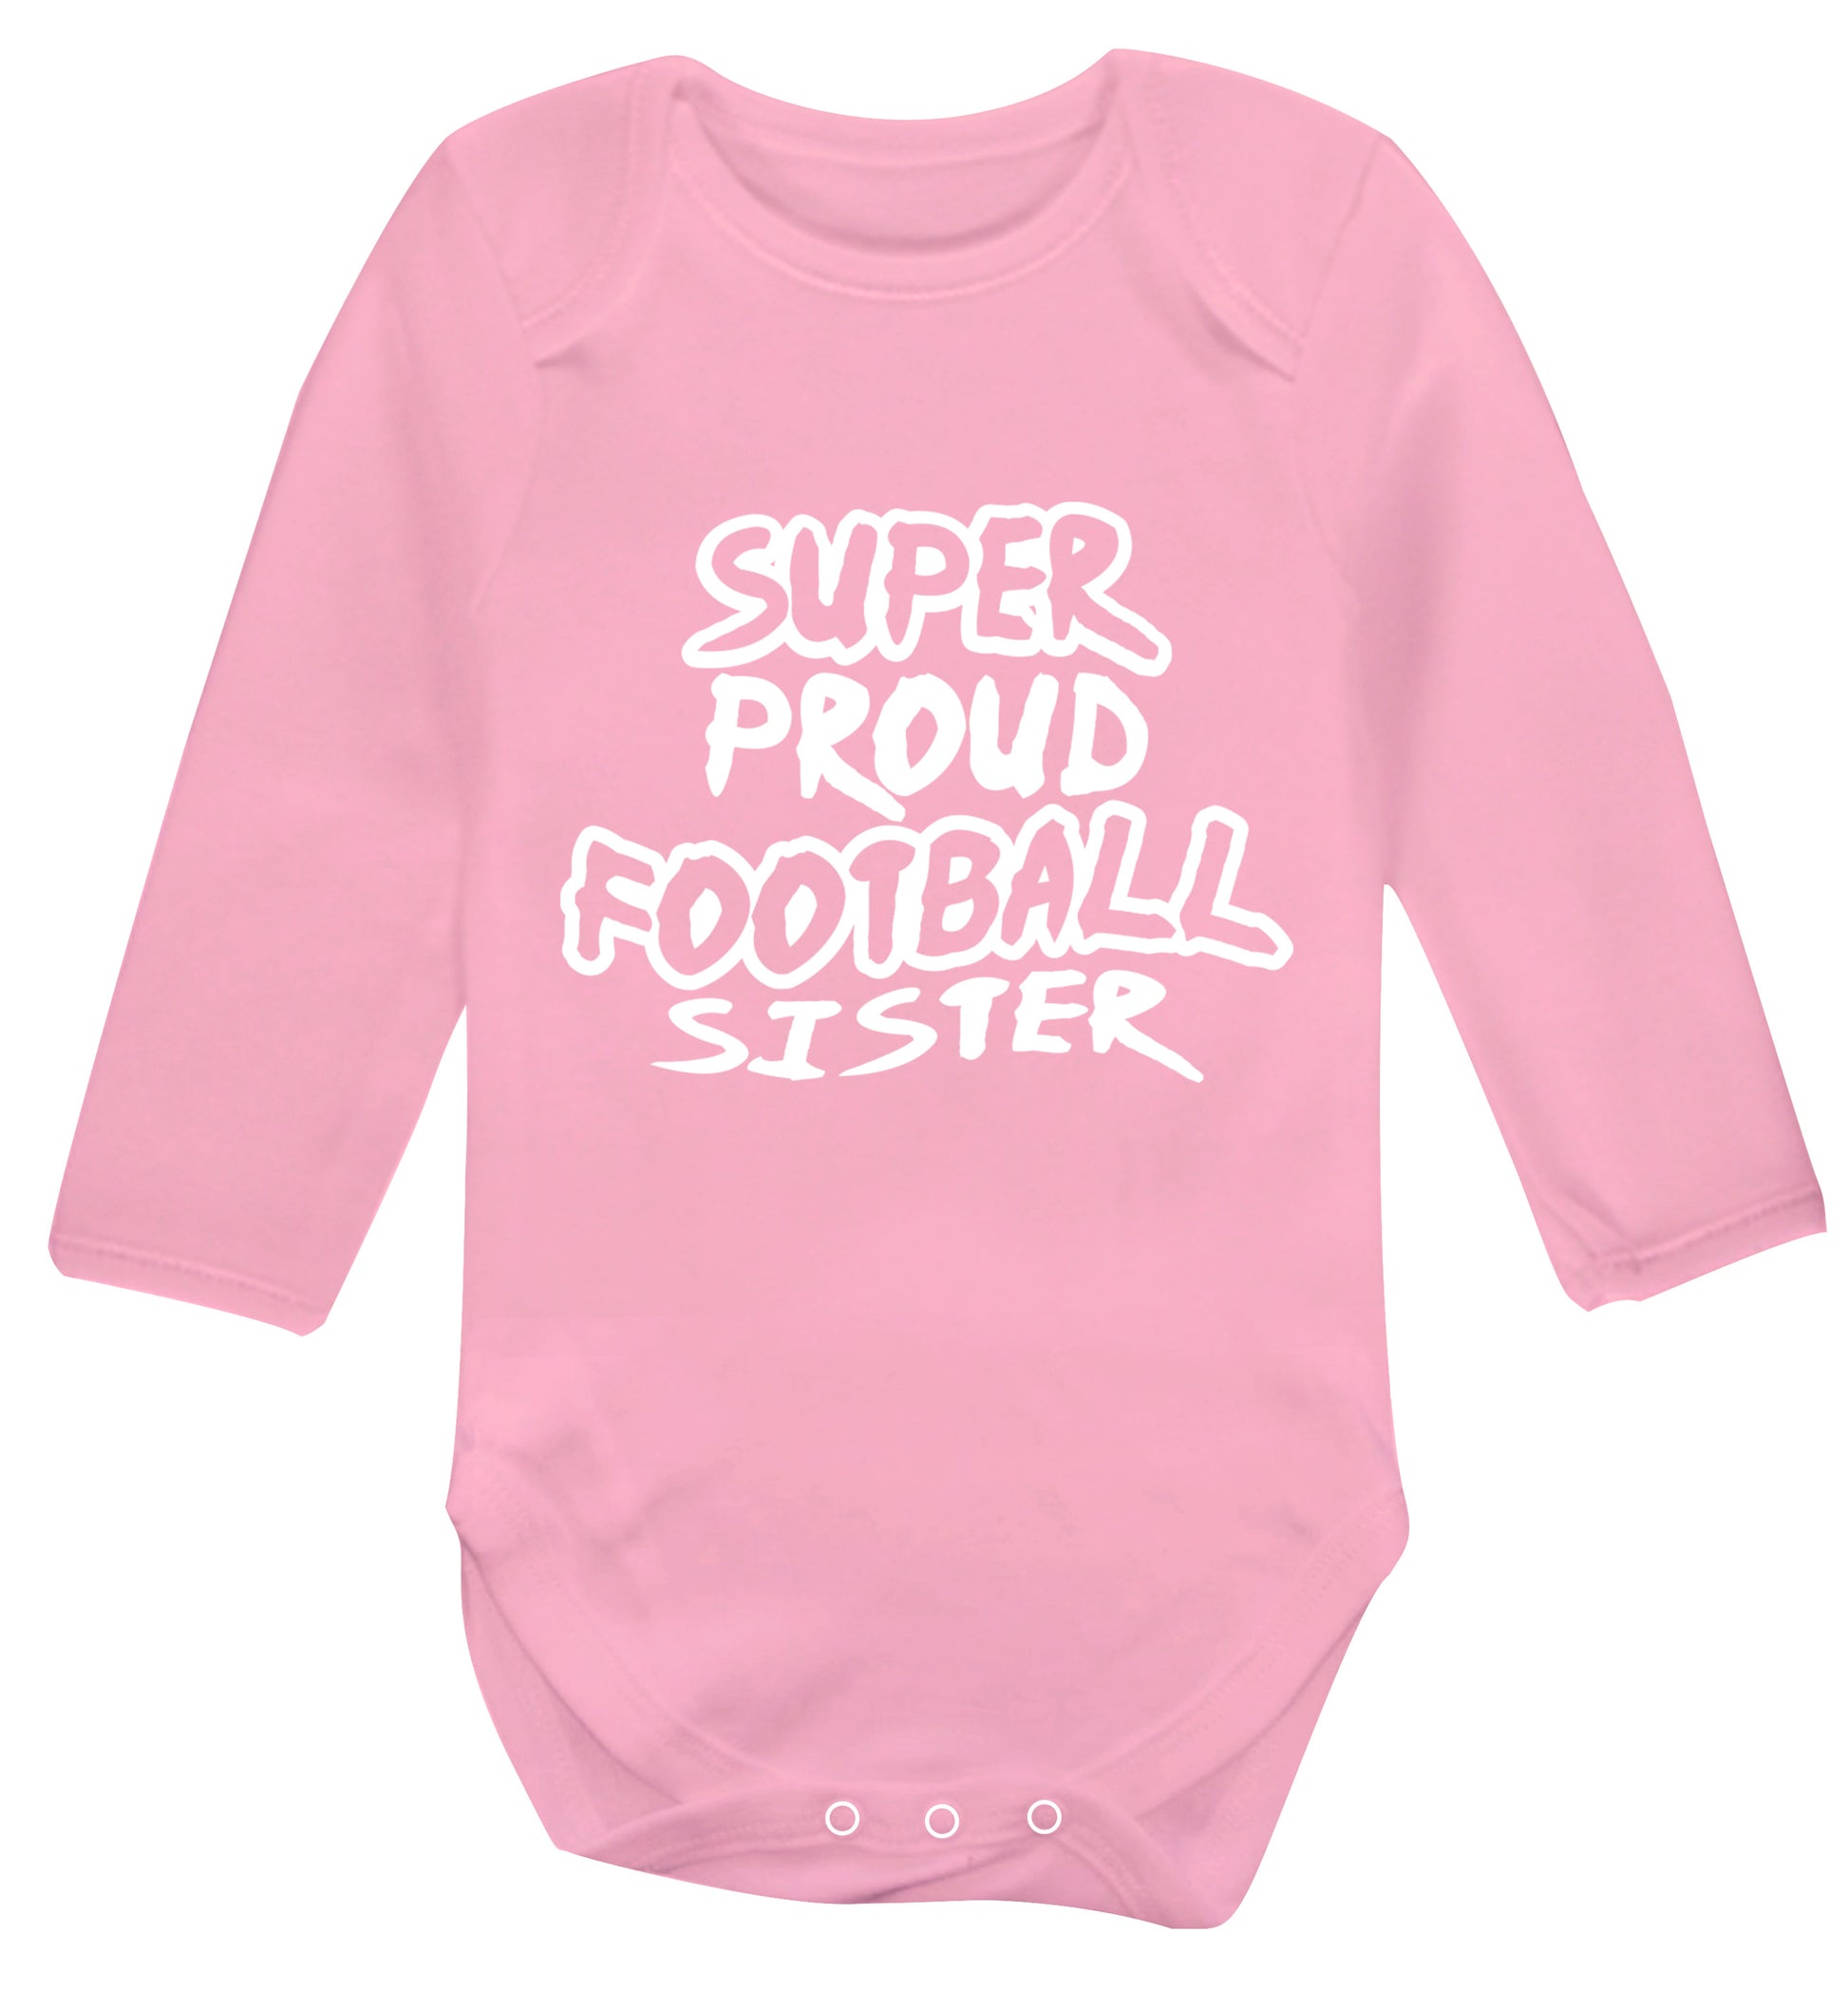 Super proud football sister Baby Vest long sleeved pale pink 6-12 months